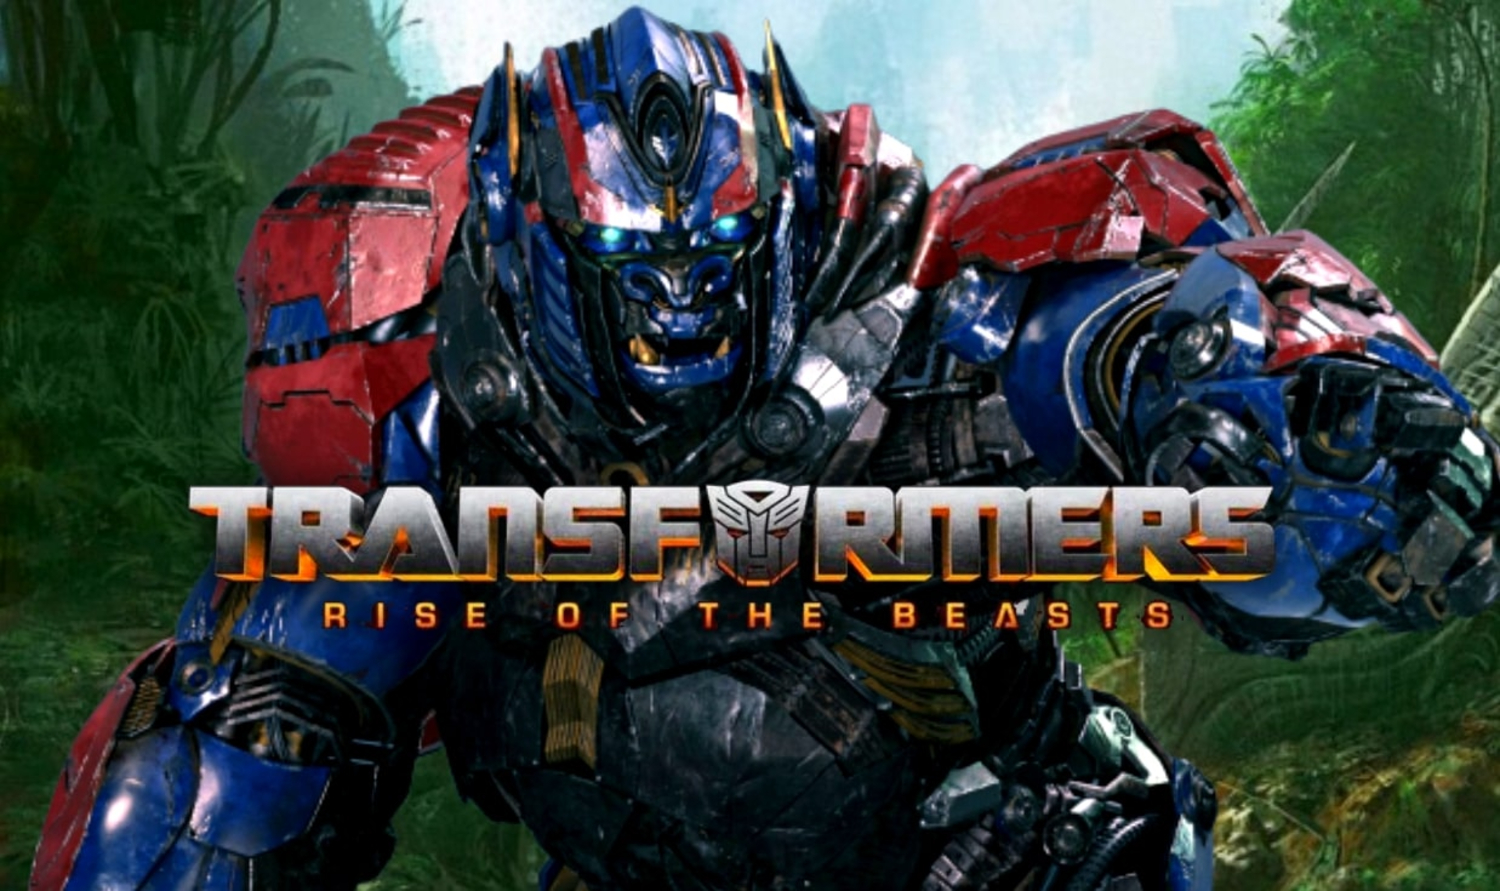 Transformers Rise Of The Beasts Wallpaper For Laptop - IMAGESEE